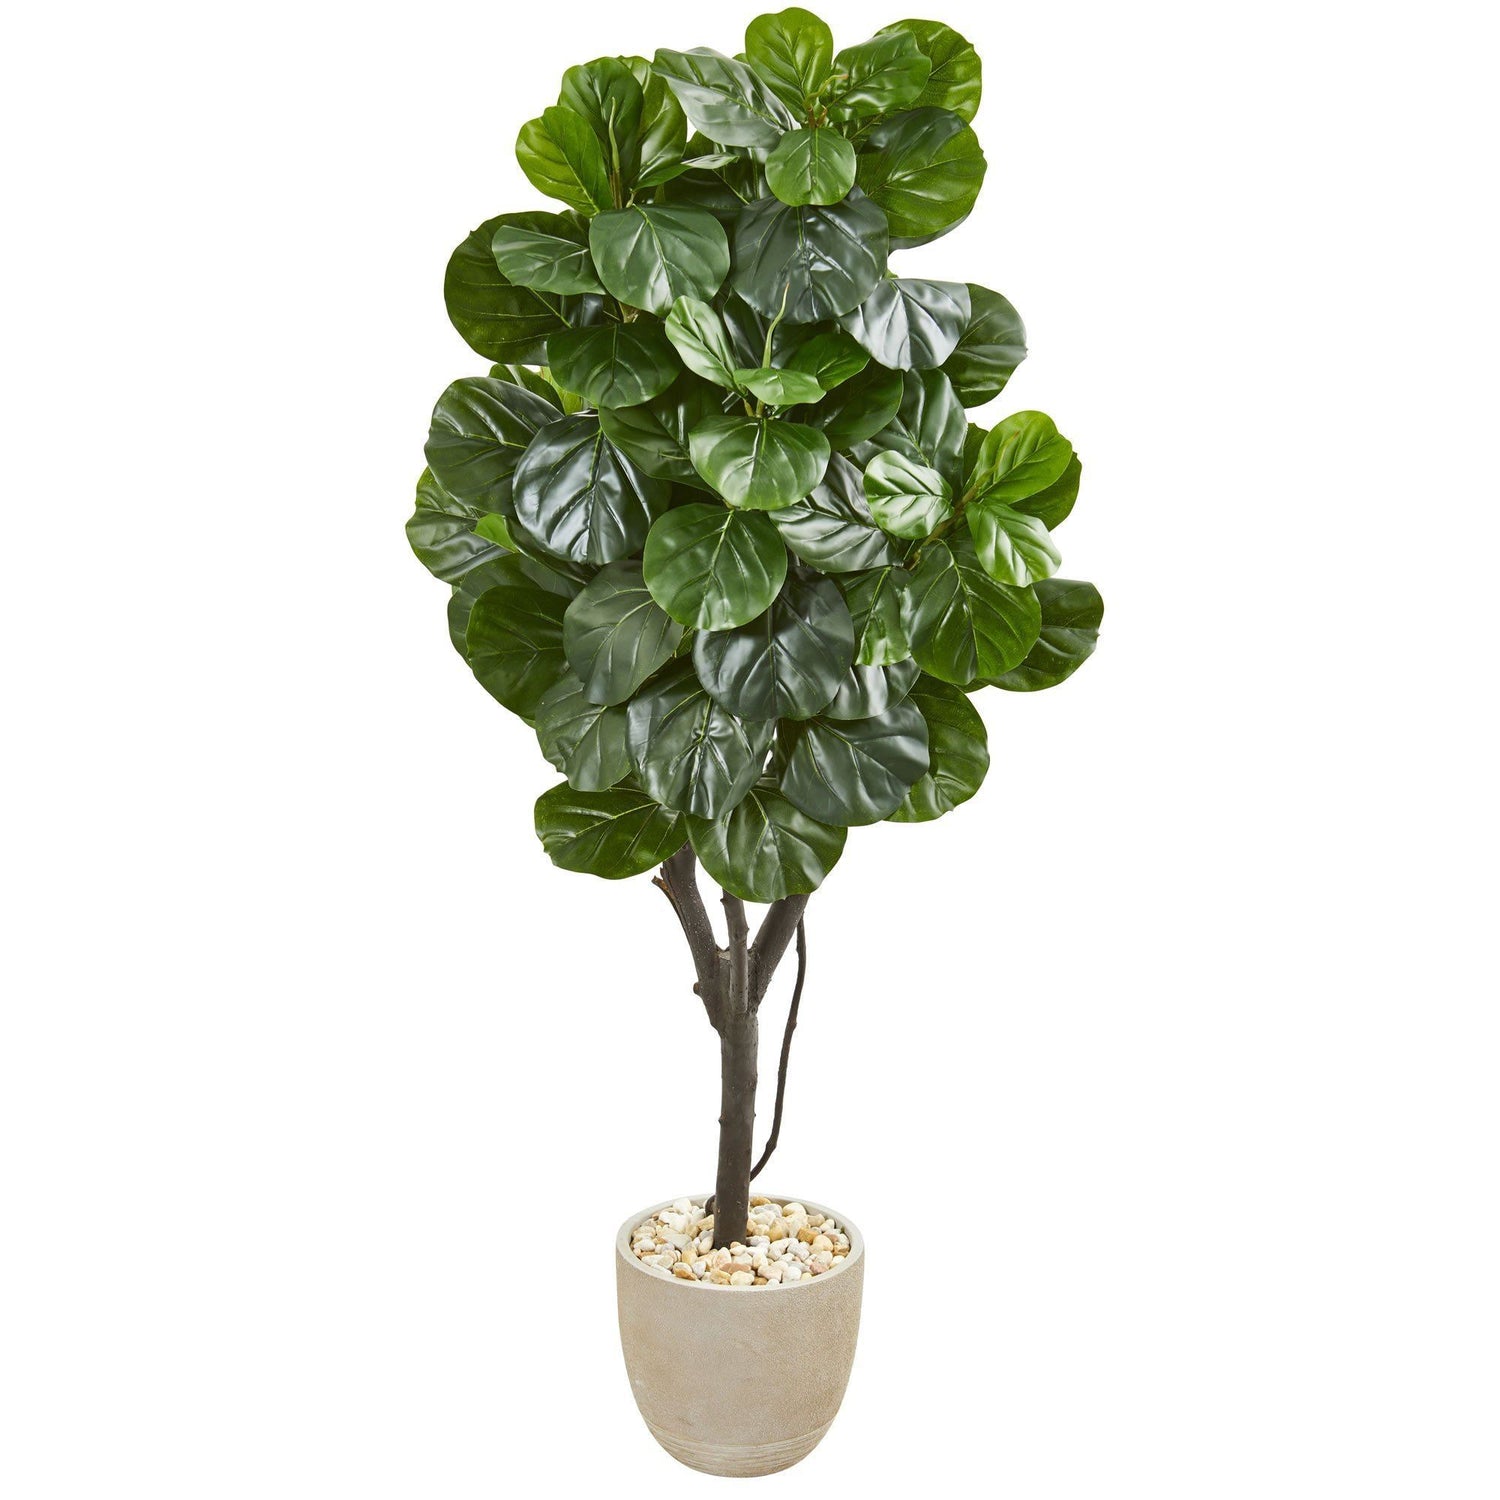 67” Fiddle Leaf Fig Artificial Tree in Sand Stone Planter